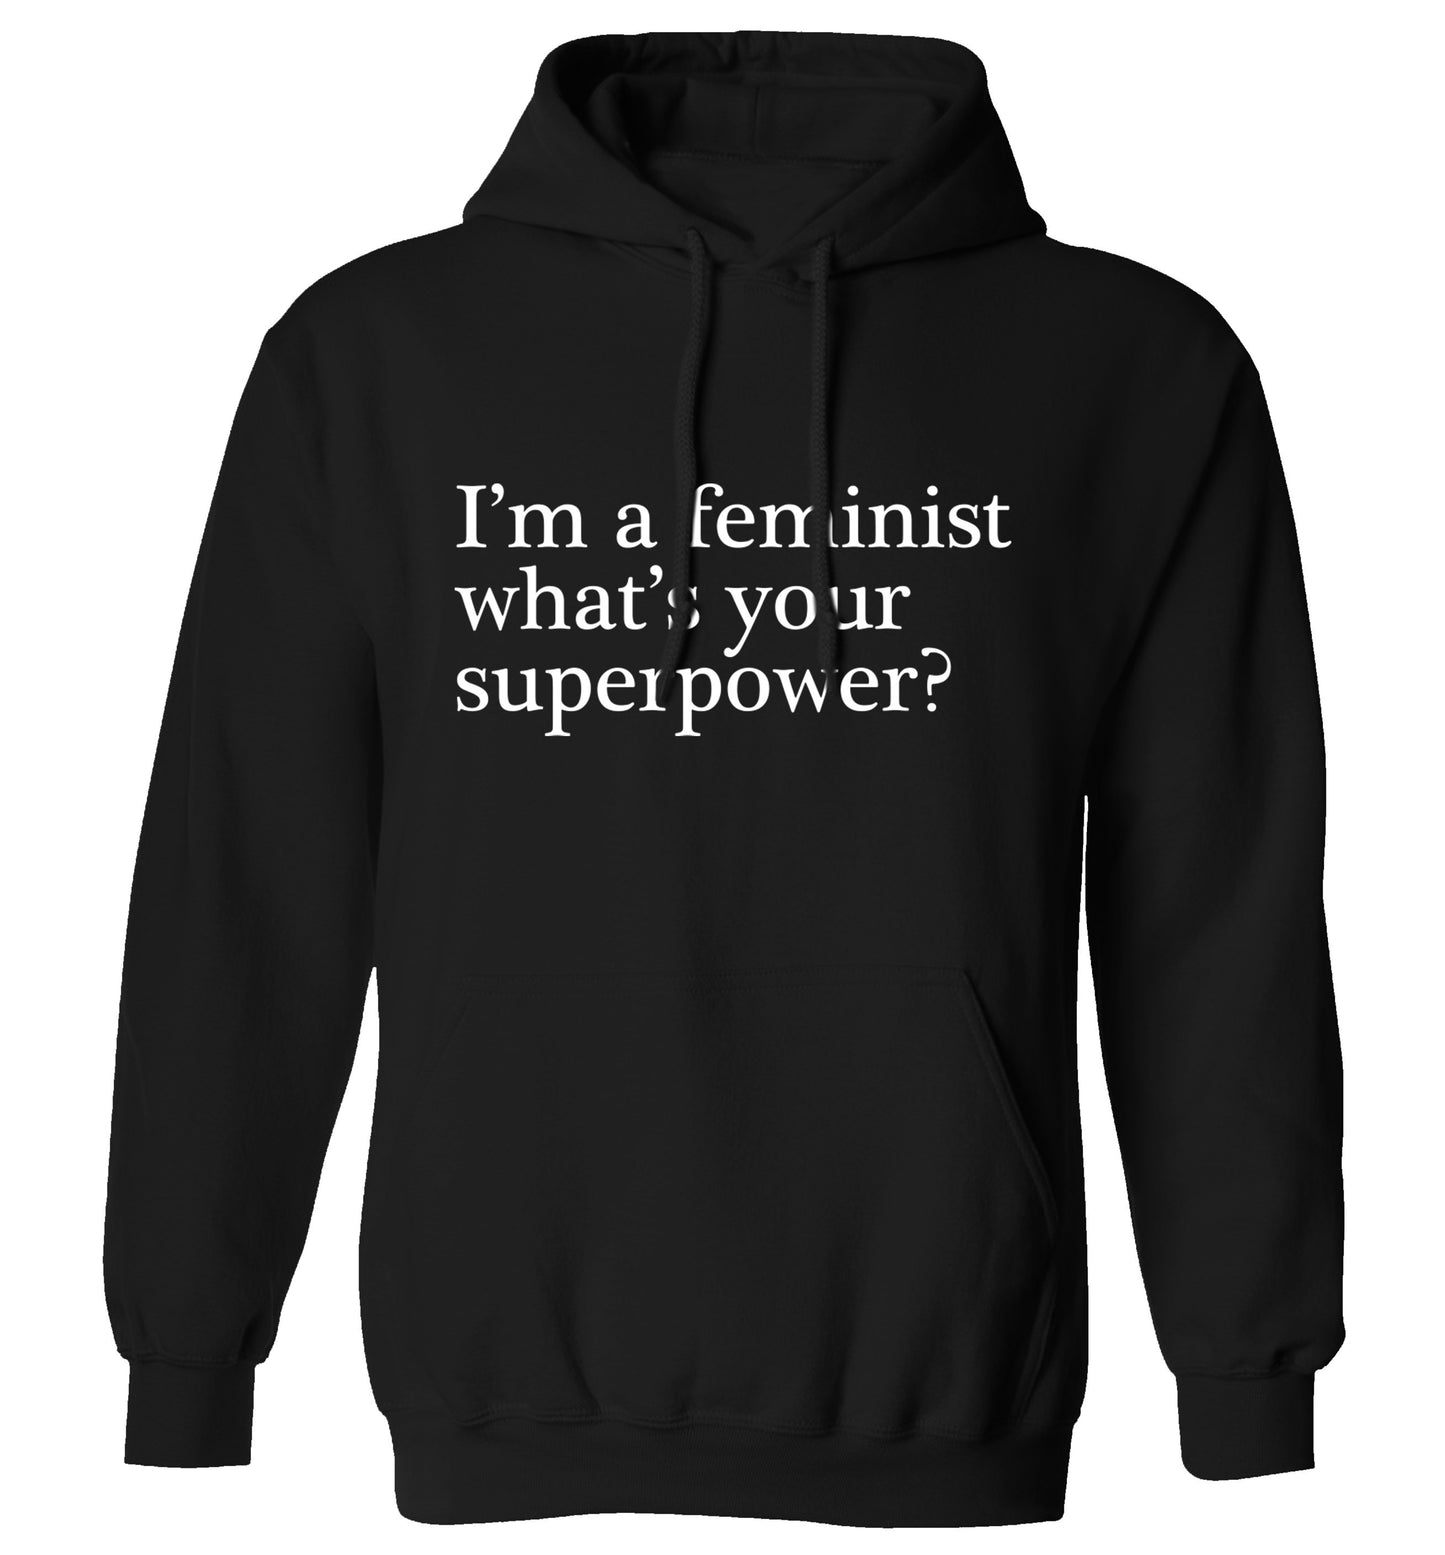 I'm a feminist what's your superpower? adults unisex black hoodie 2XL